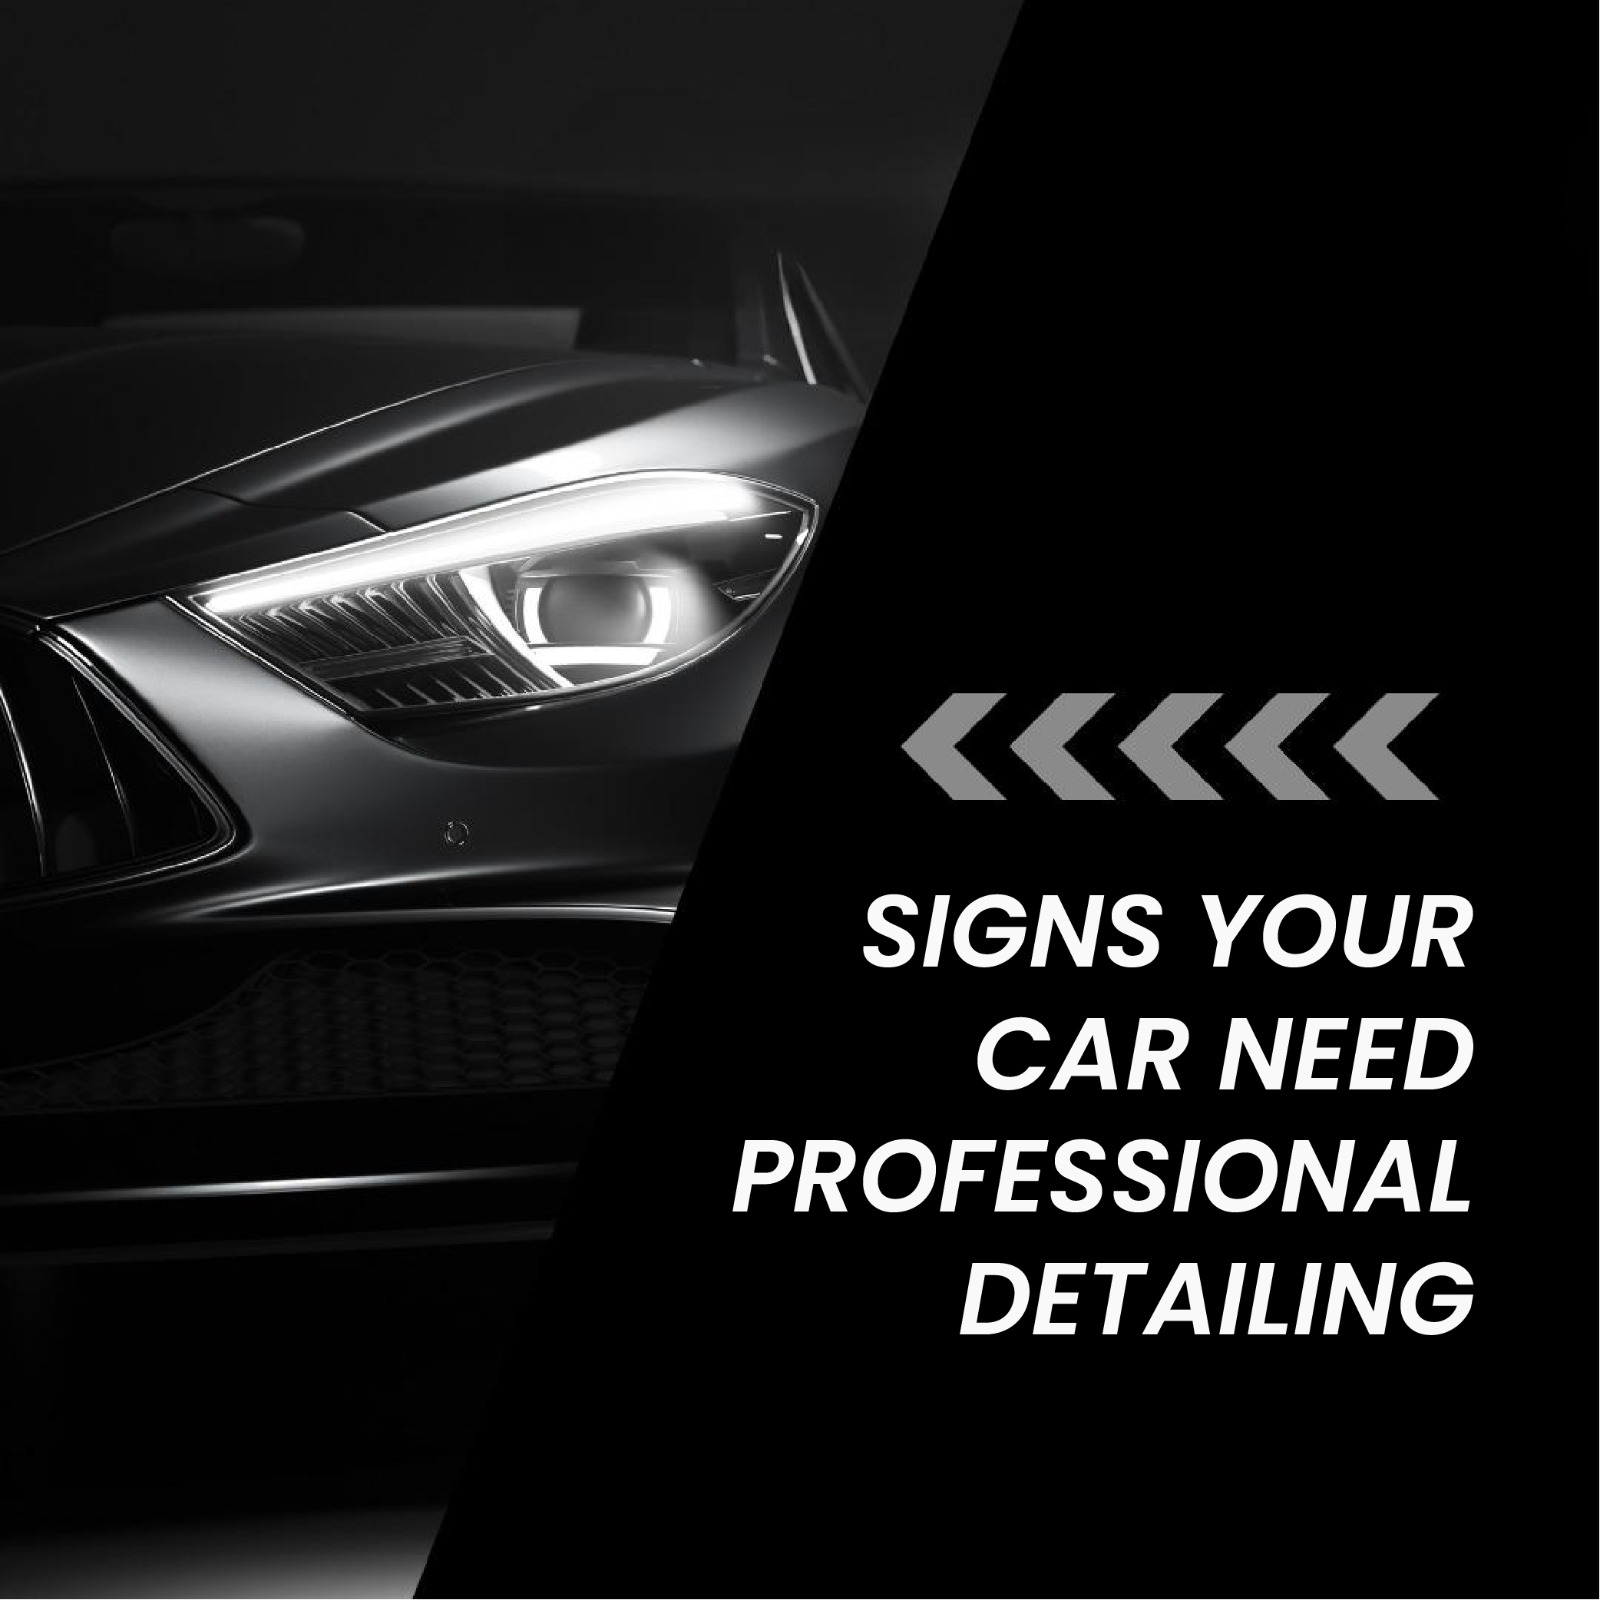 Signs Your Car Needs Professional Detailing